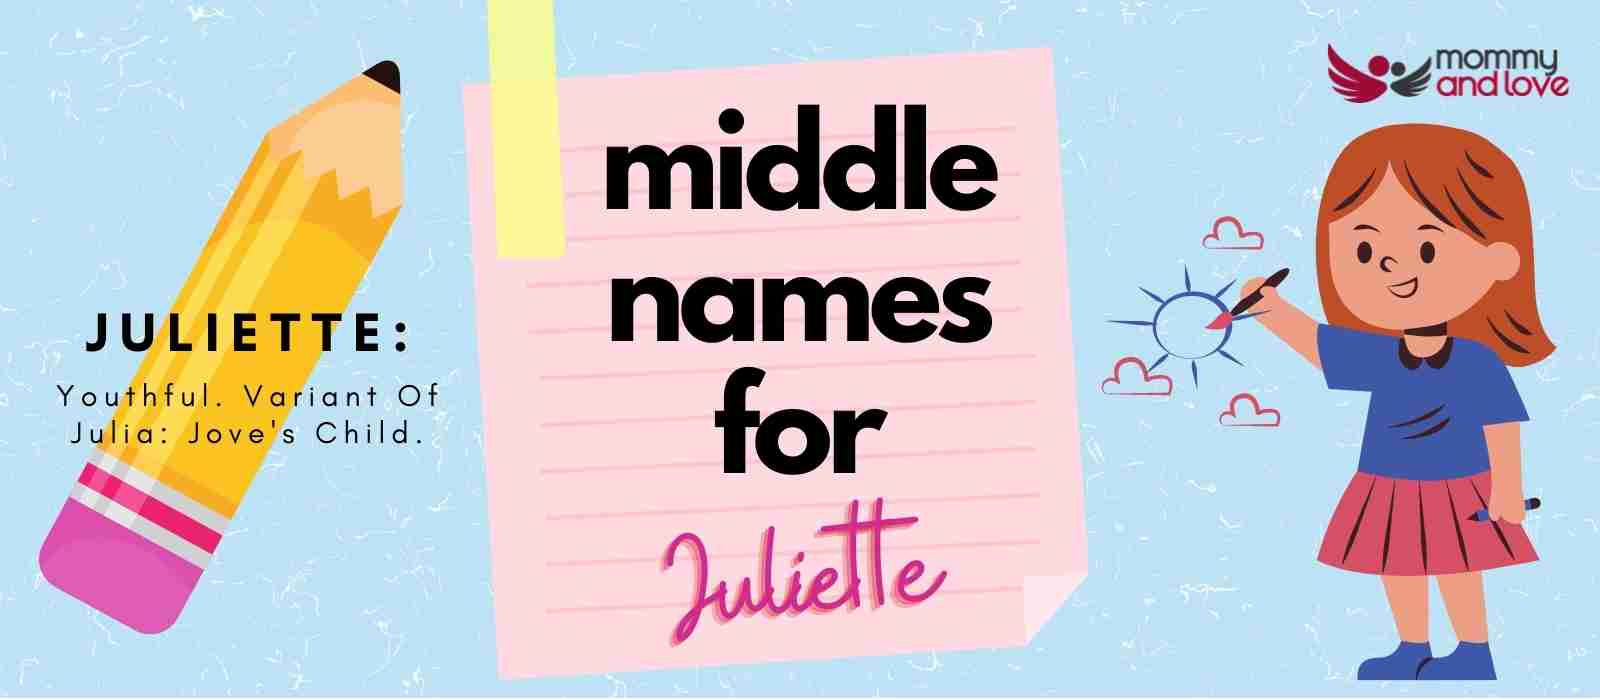 Middle Names for Juliette